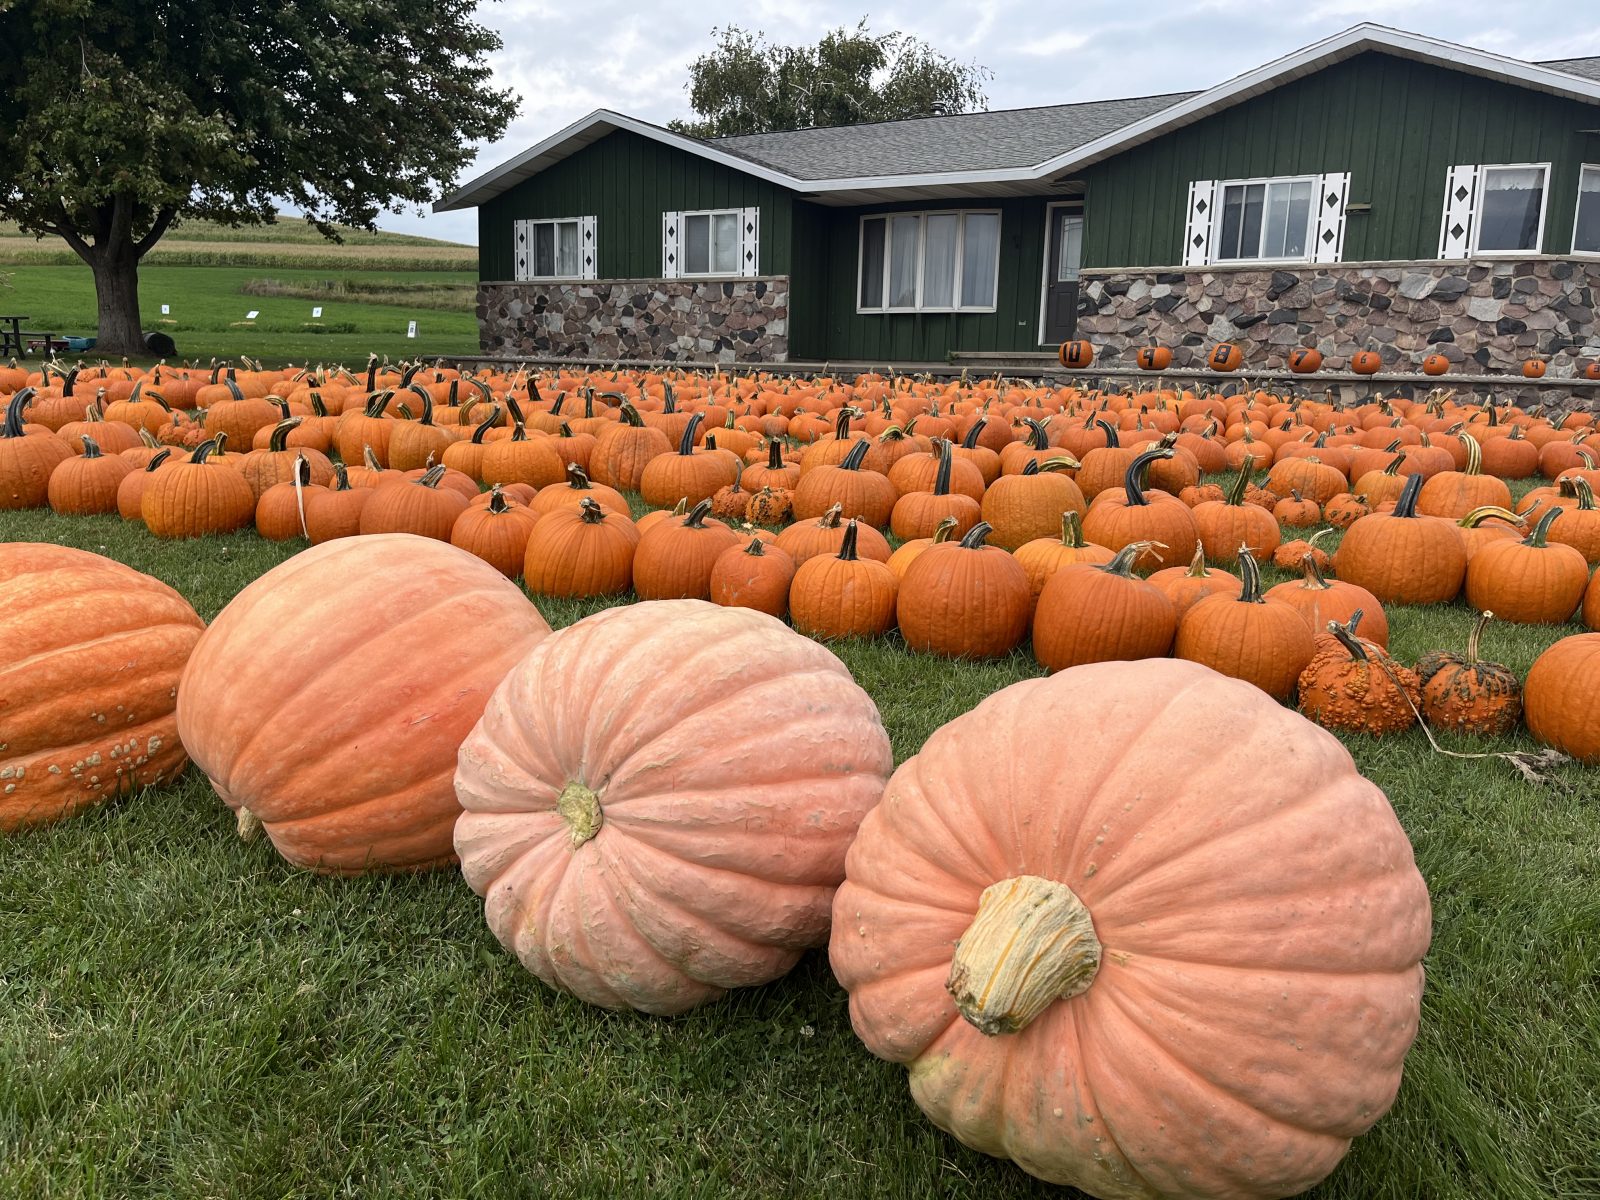 Many pumpkins are lined up in front of a house.